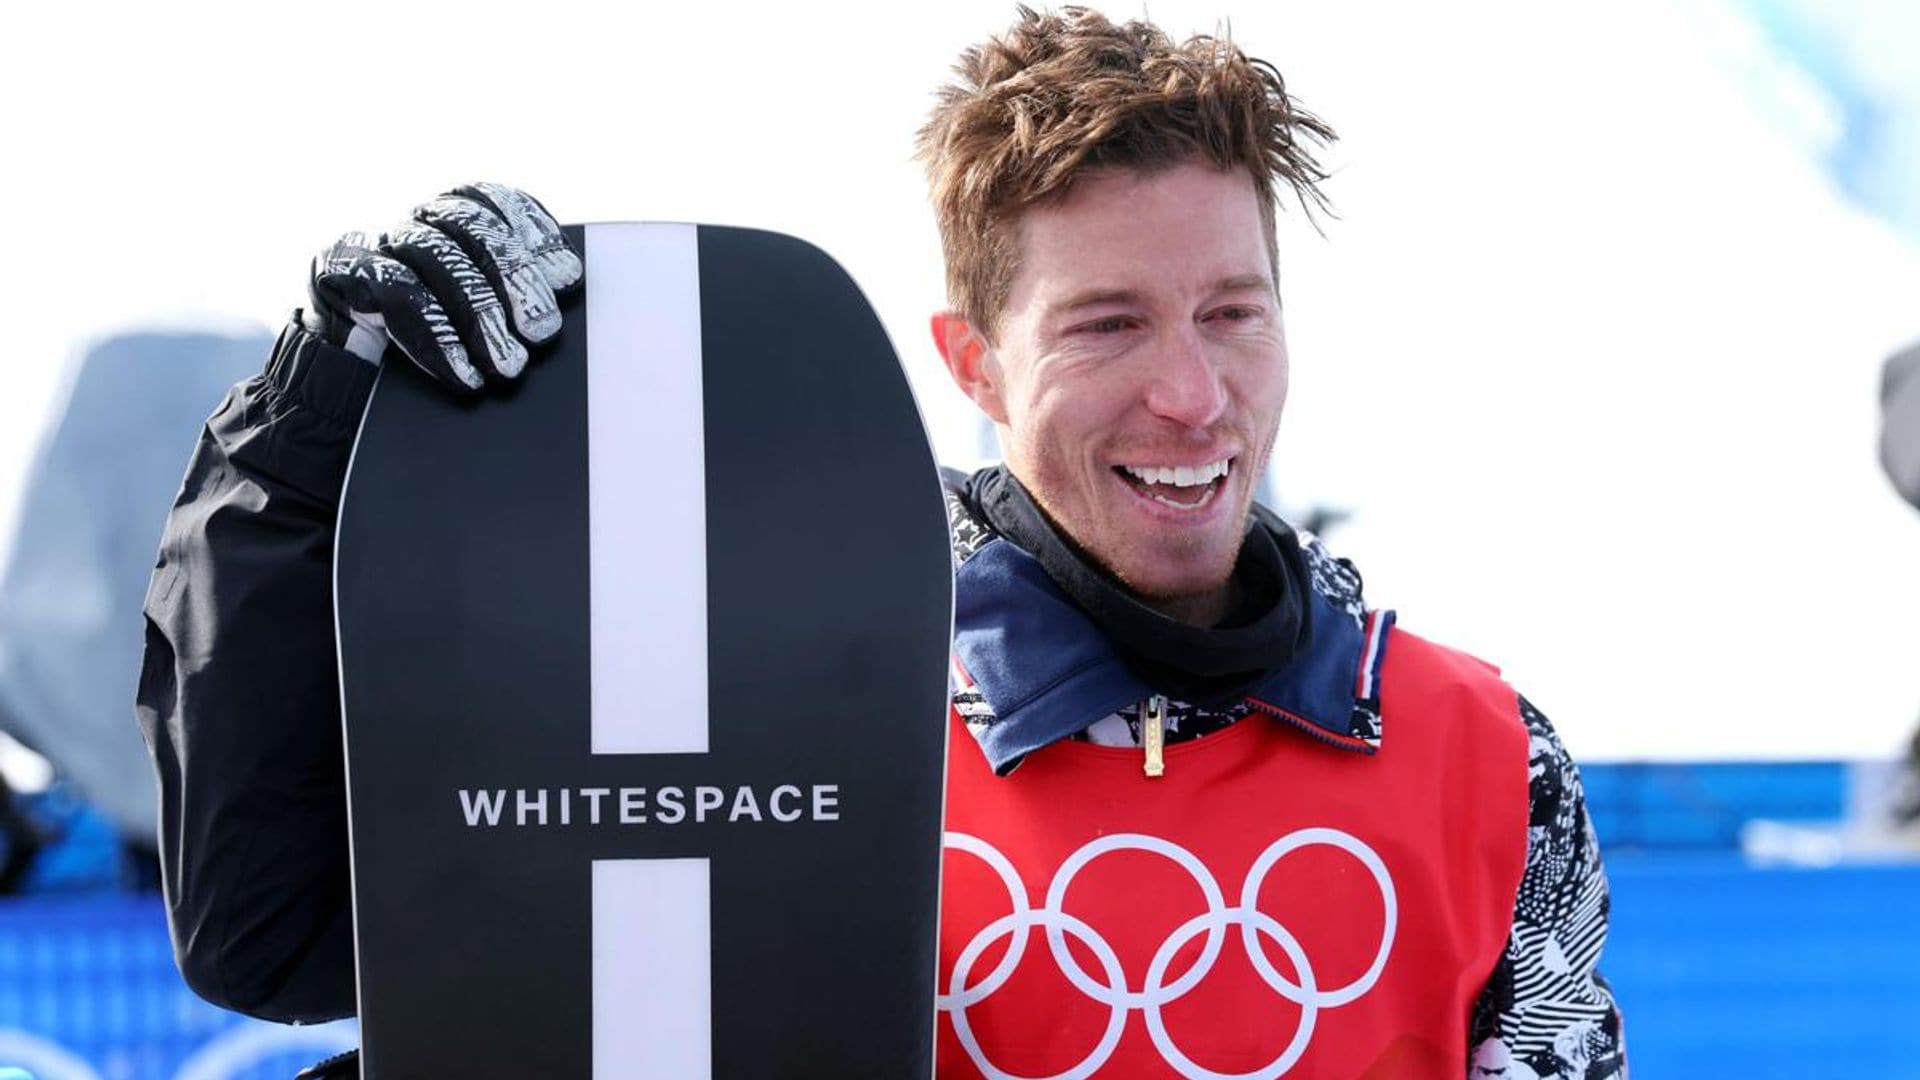 Shaun White quickly crossed one thing off his bucket list following retirement